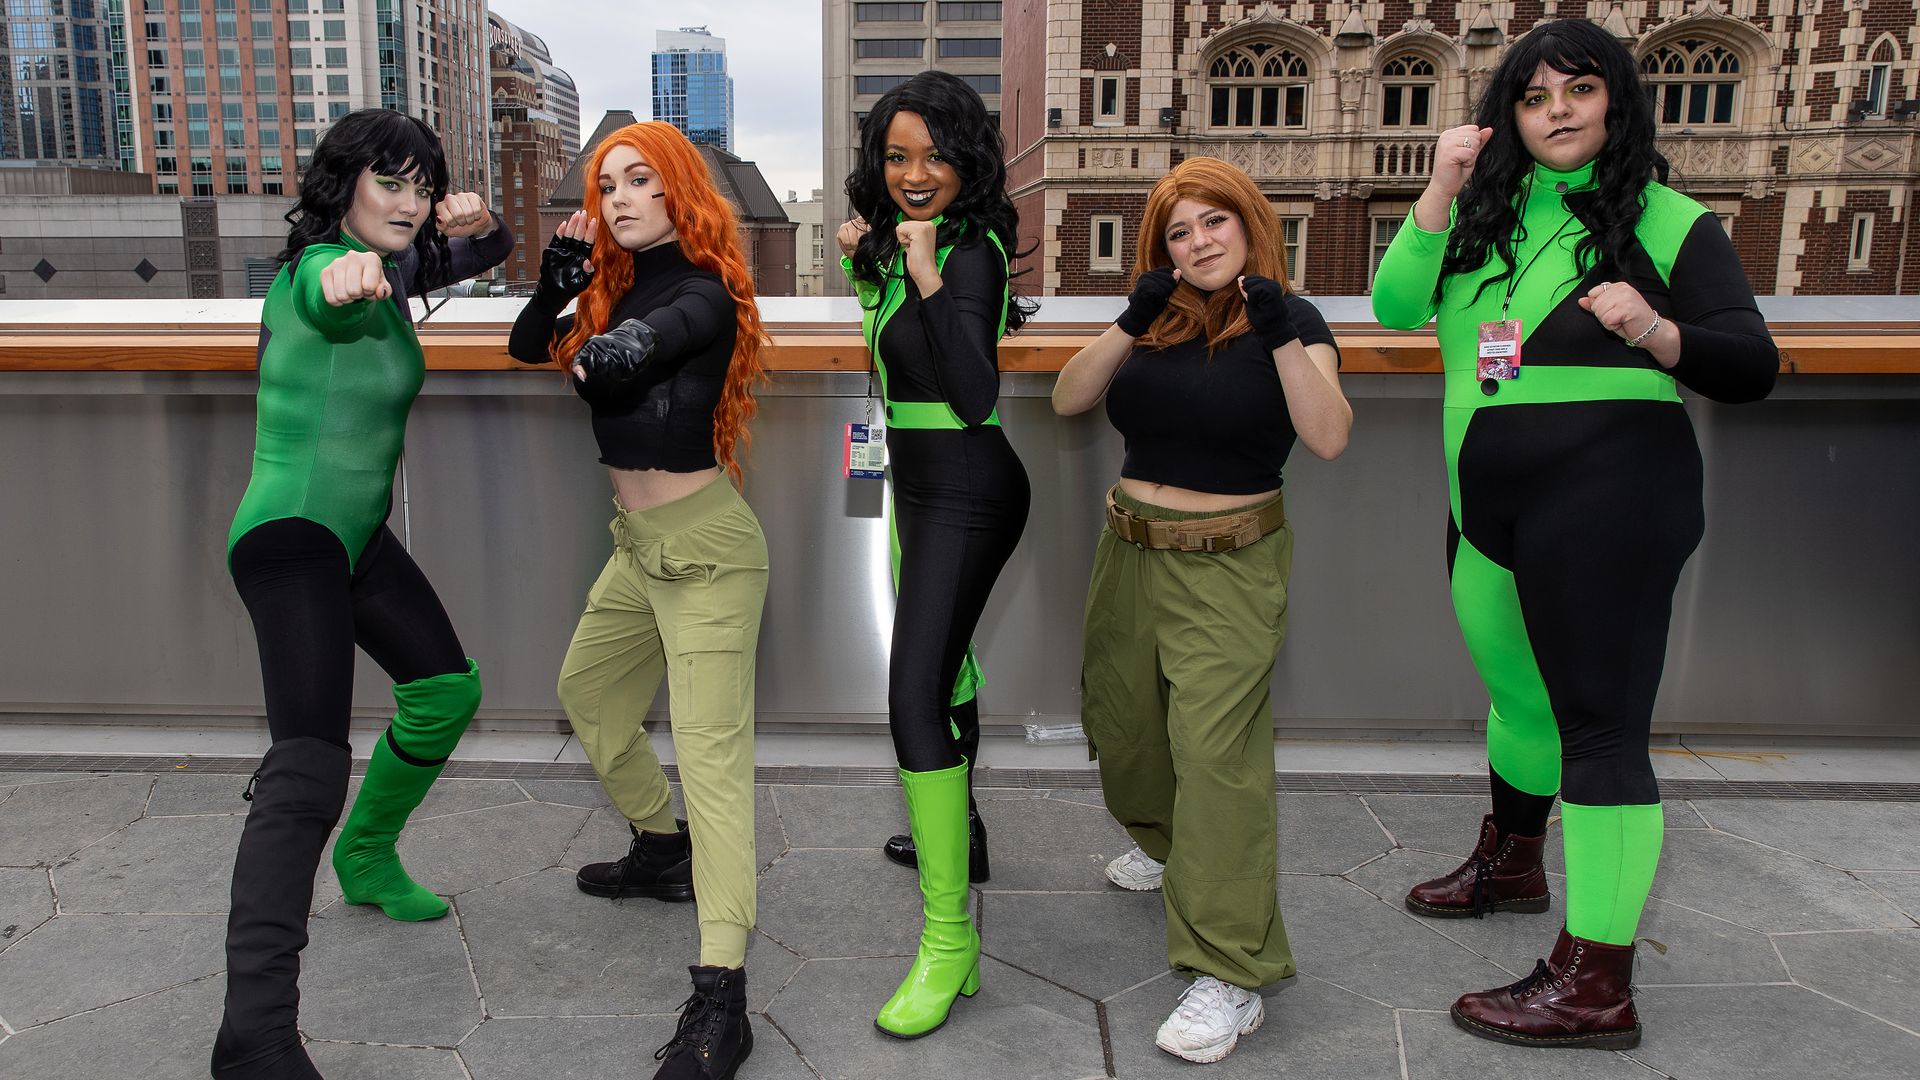 Five women stand on a rooftop in green and black cosplay gear, in a boxing pose with their hands up as if ready to fight.